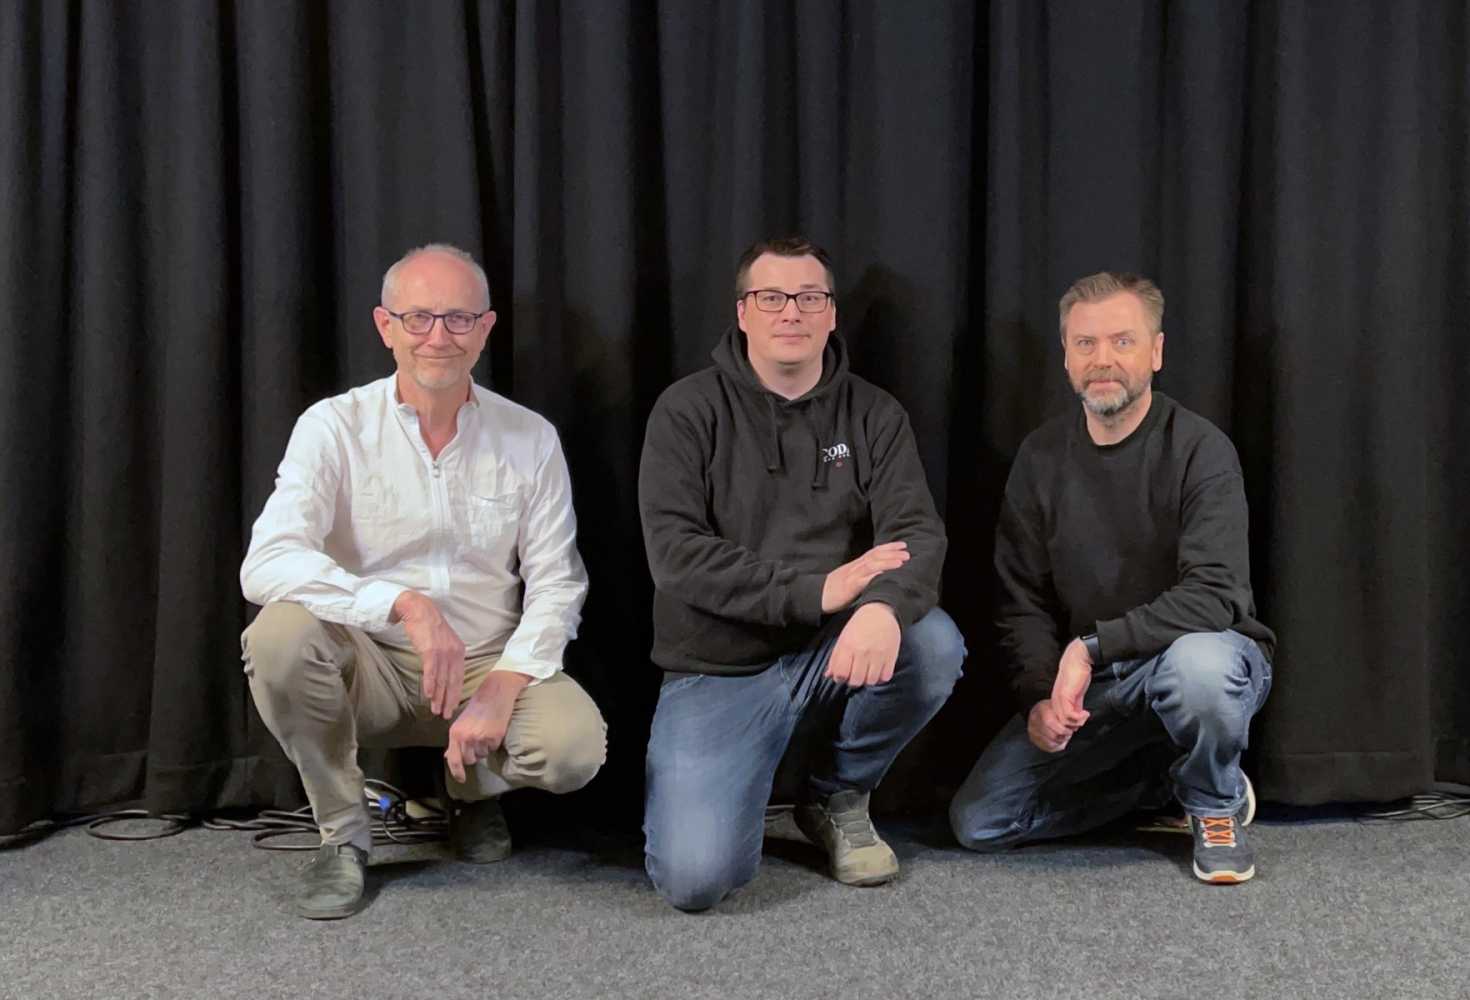 The Rubicon team of CEO Petter Norby, Sales Terje Sørlund and head of business development Inge Eidem